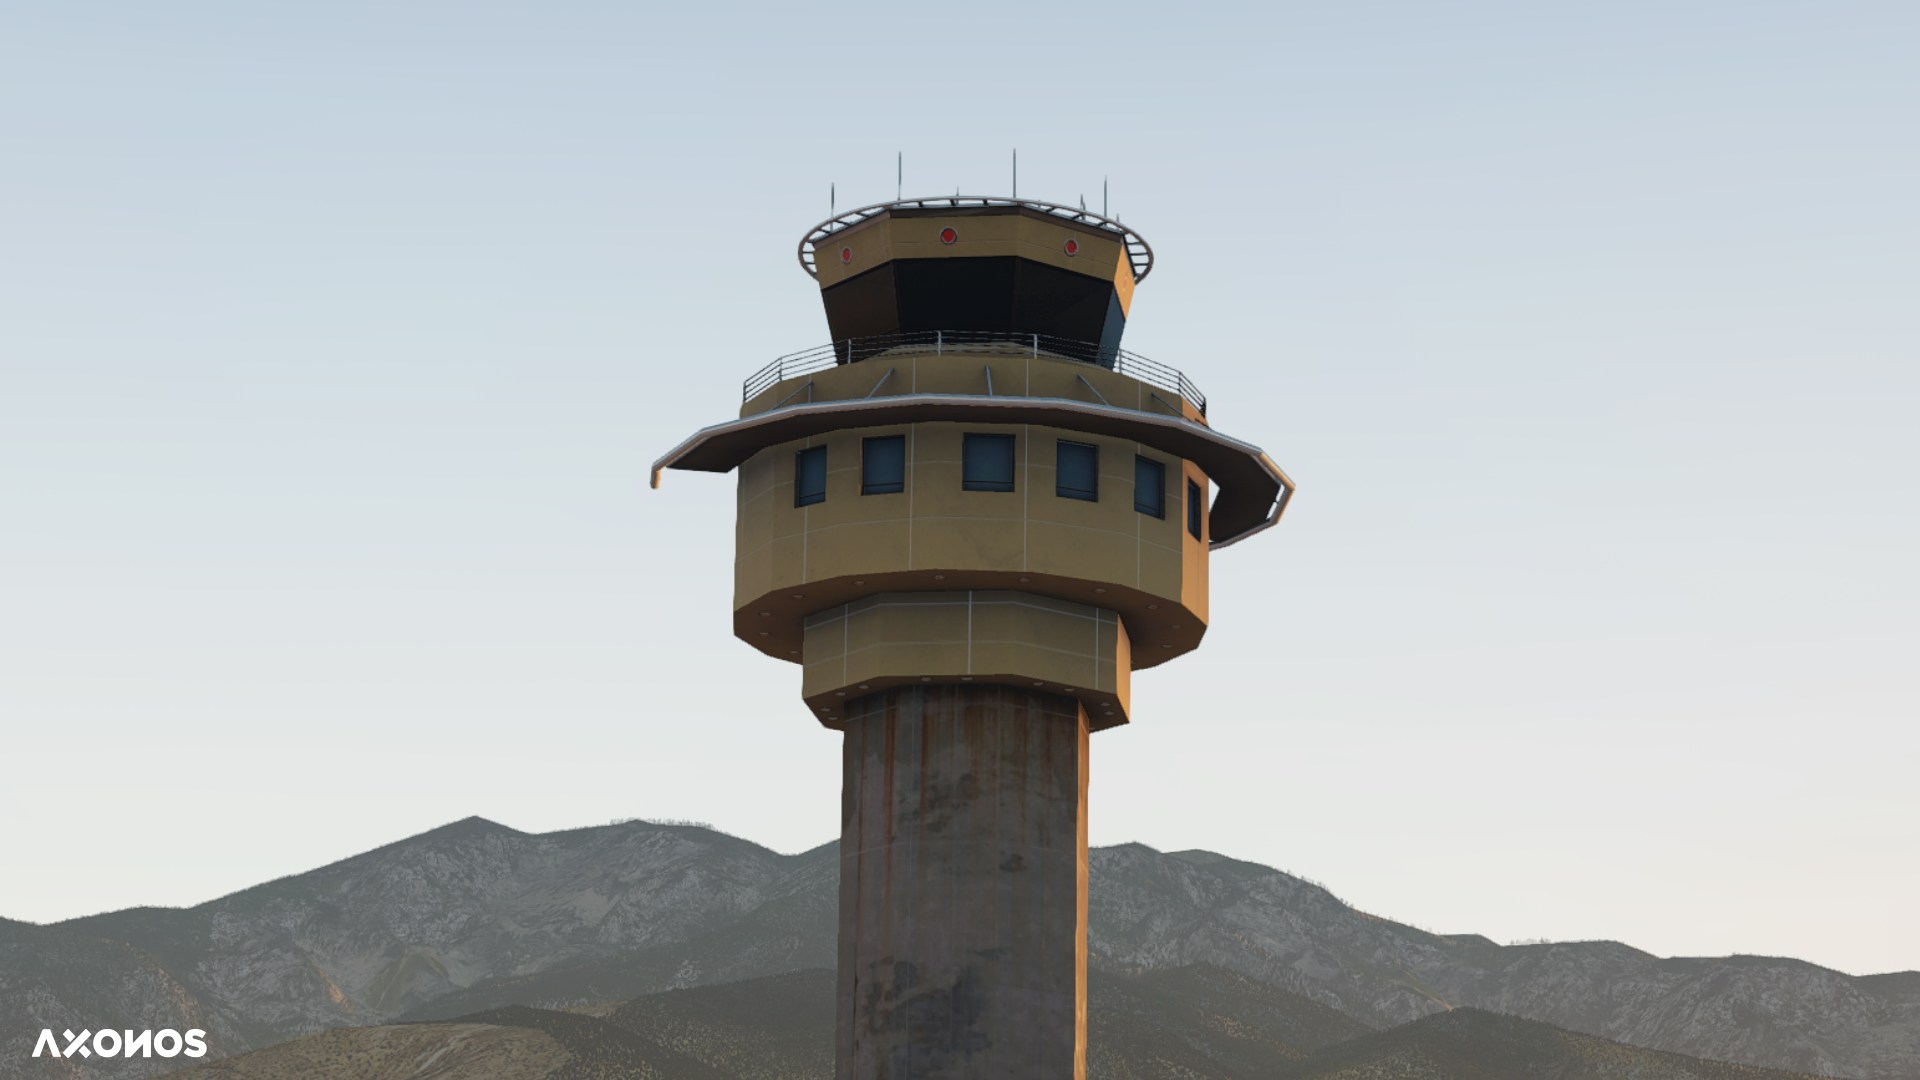 Axonos releases Palm Springs International Airport for X-Plane